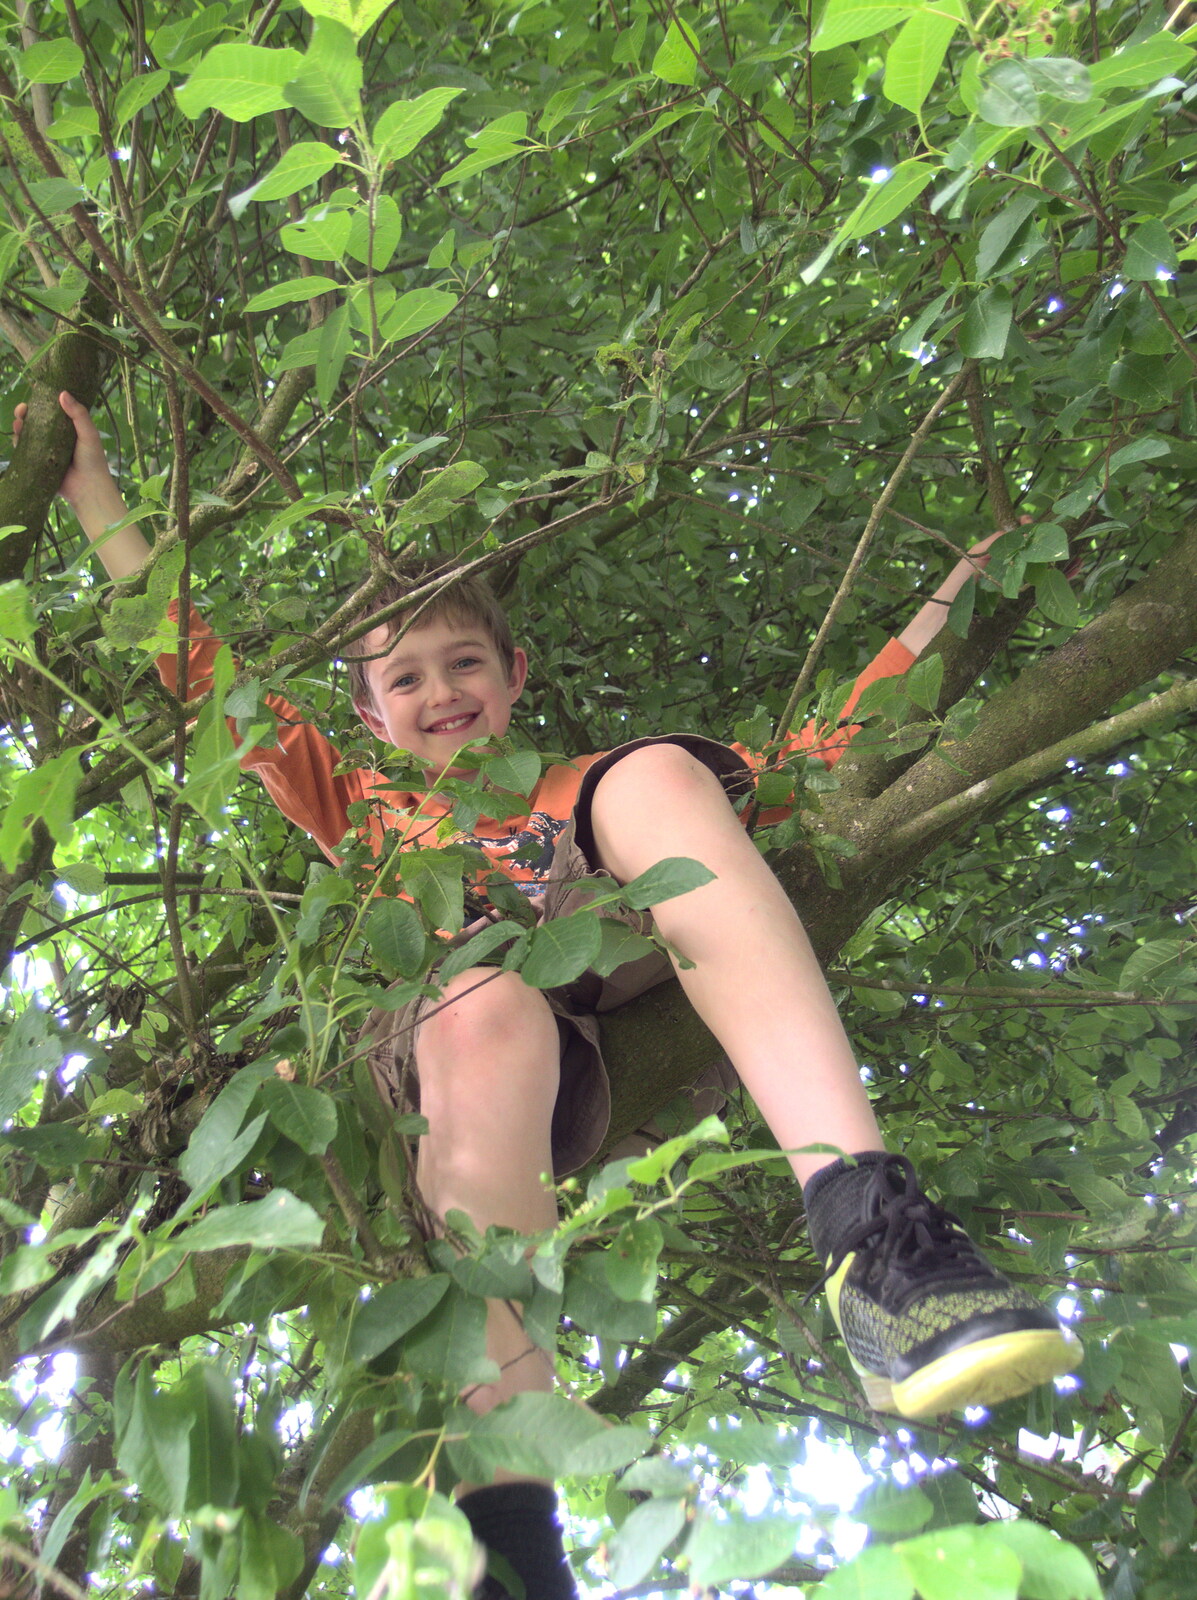 Fred up a tree from Dower House Camping, West Harling, Norfolk - 27th May 2018